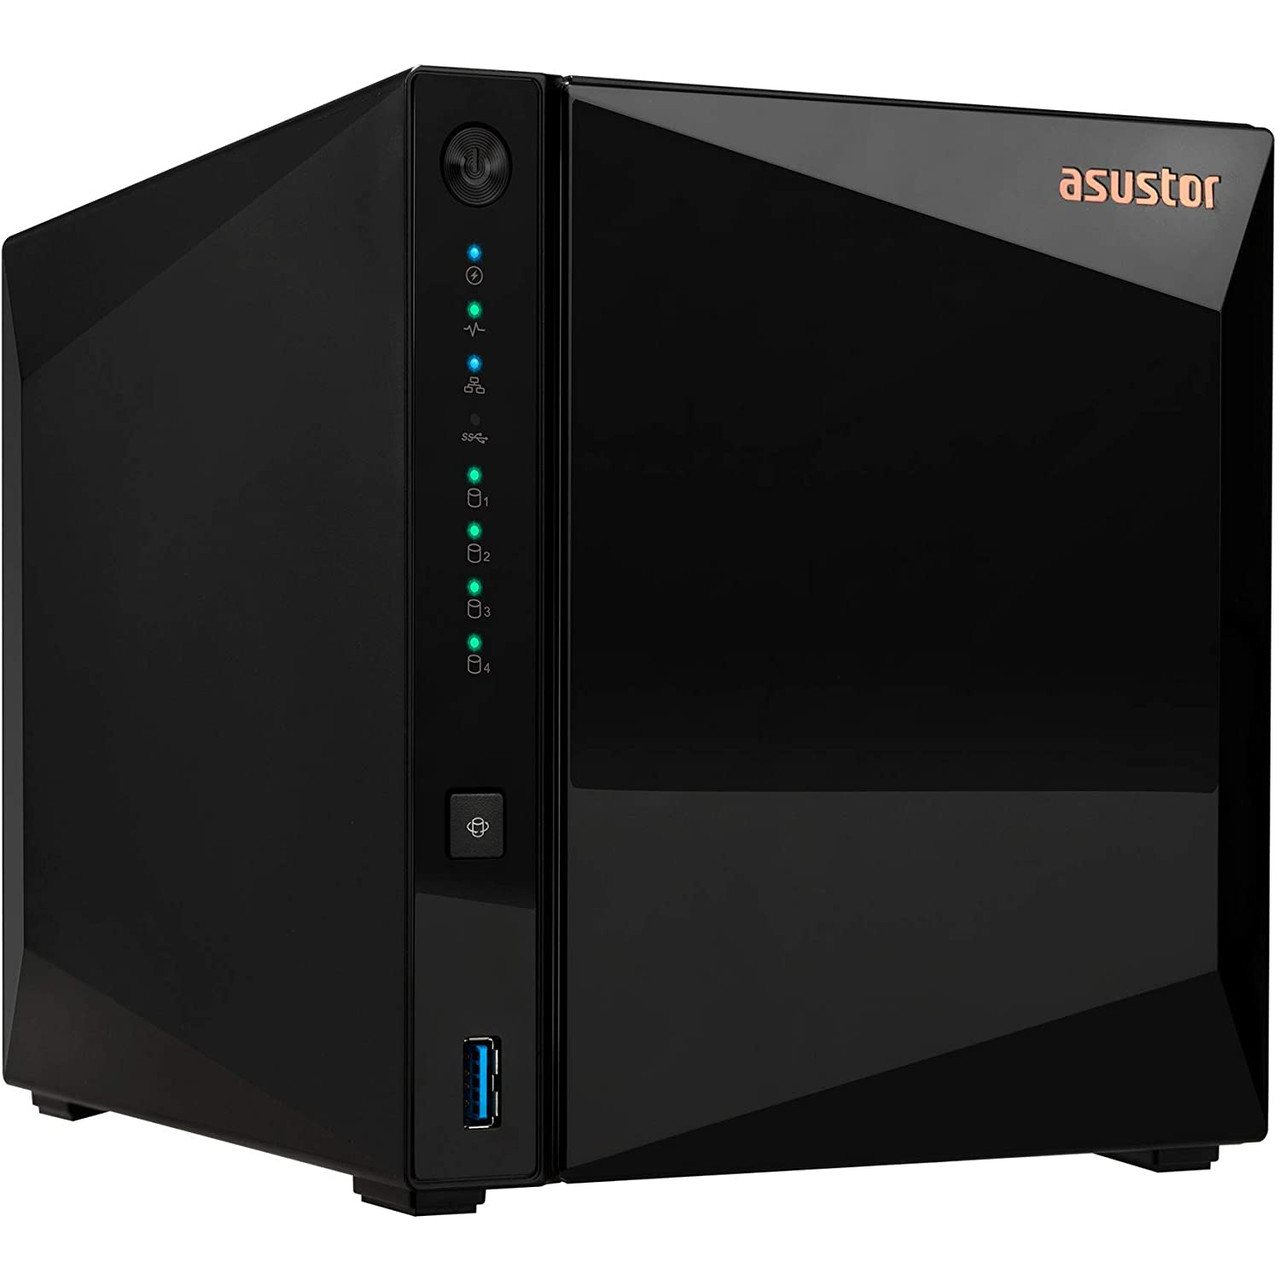 Asustor AS3304T DRIVESTOR 4 Pro, Personal 4-Bays NAS, Quad-Core CPU, 2.5GbE Port, 2GB DDR4 RAM, Network Attached Storage (Diskless)